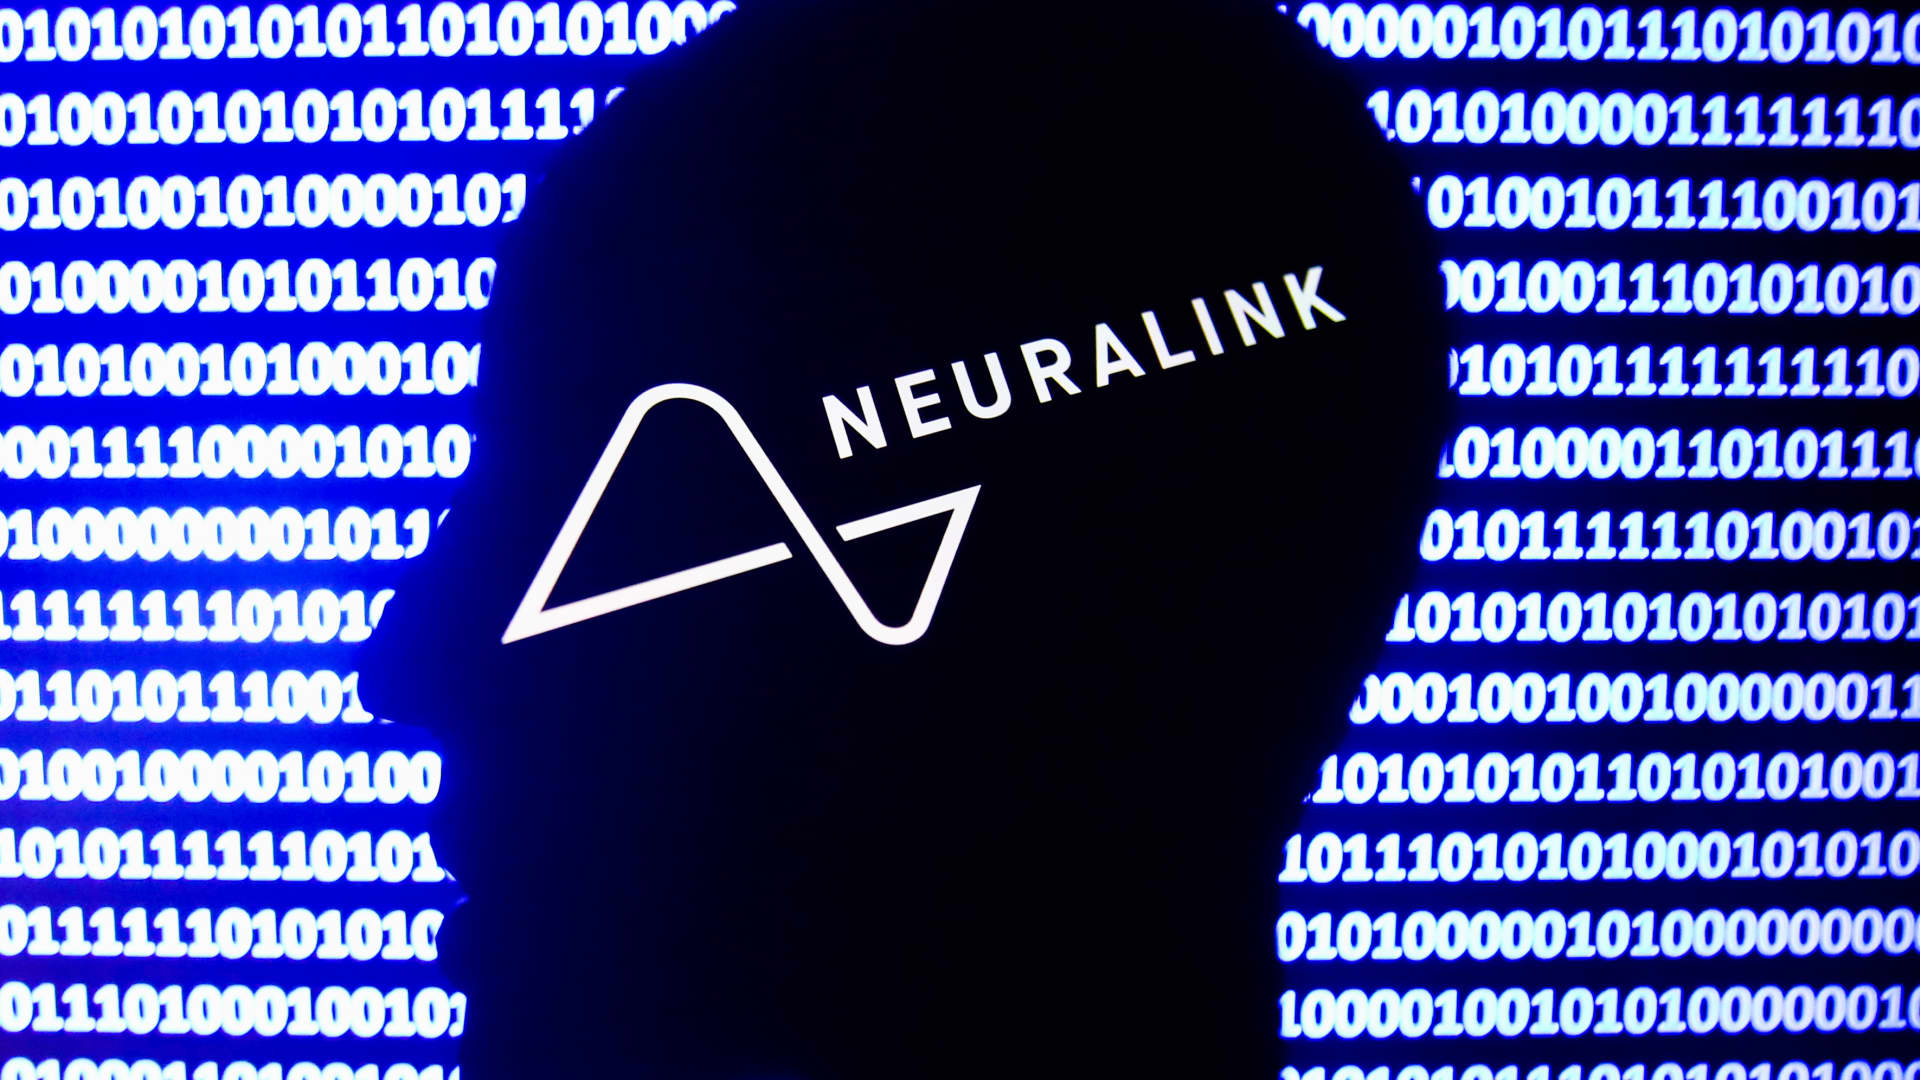  Elon Musk’s brain implant company Neuralink announces FDA approval of in-human clinical study